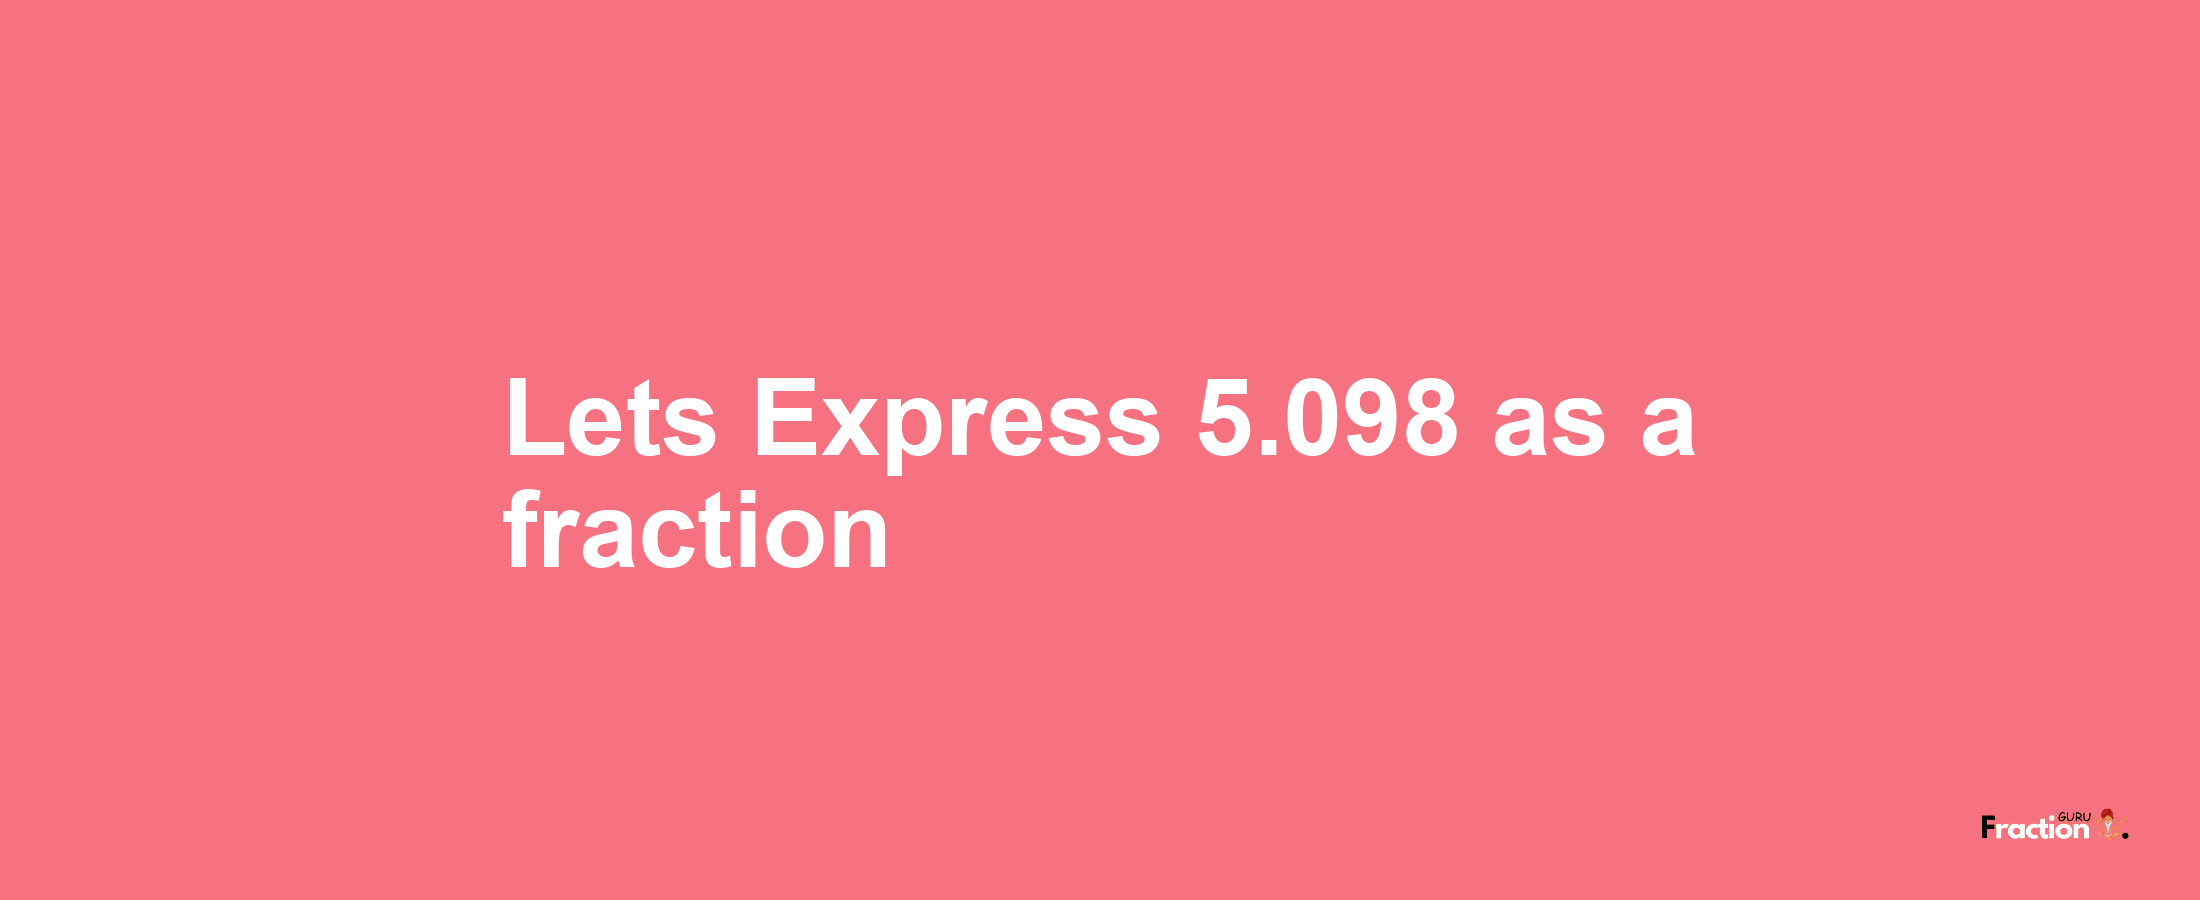 Lets Express 5.098 as afraction